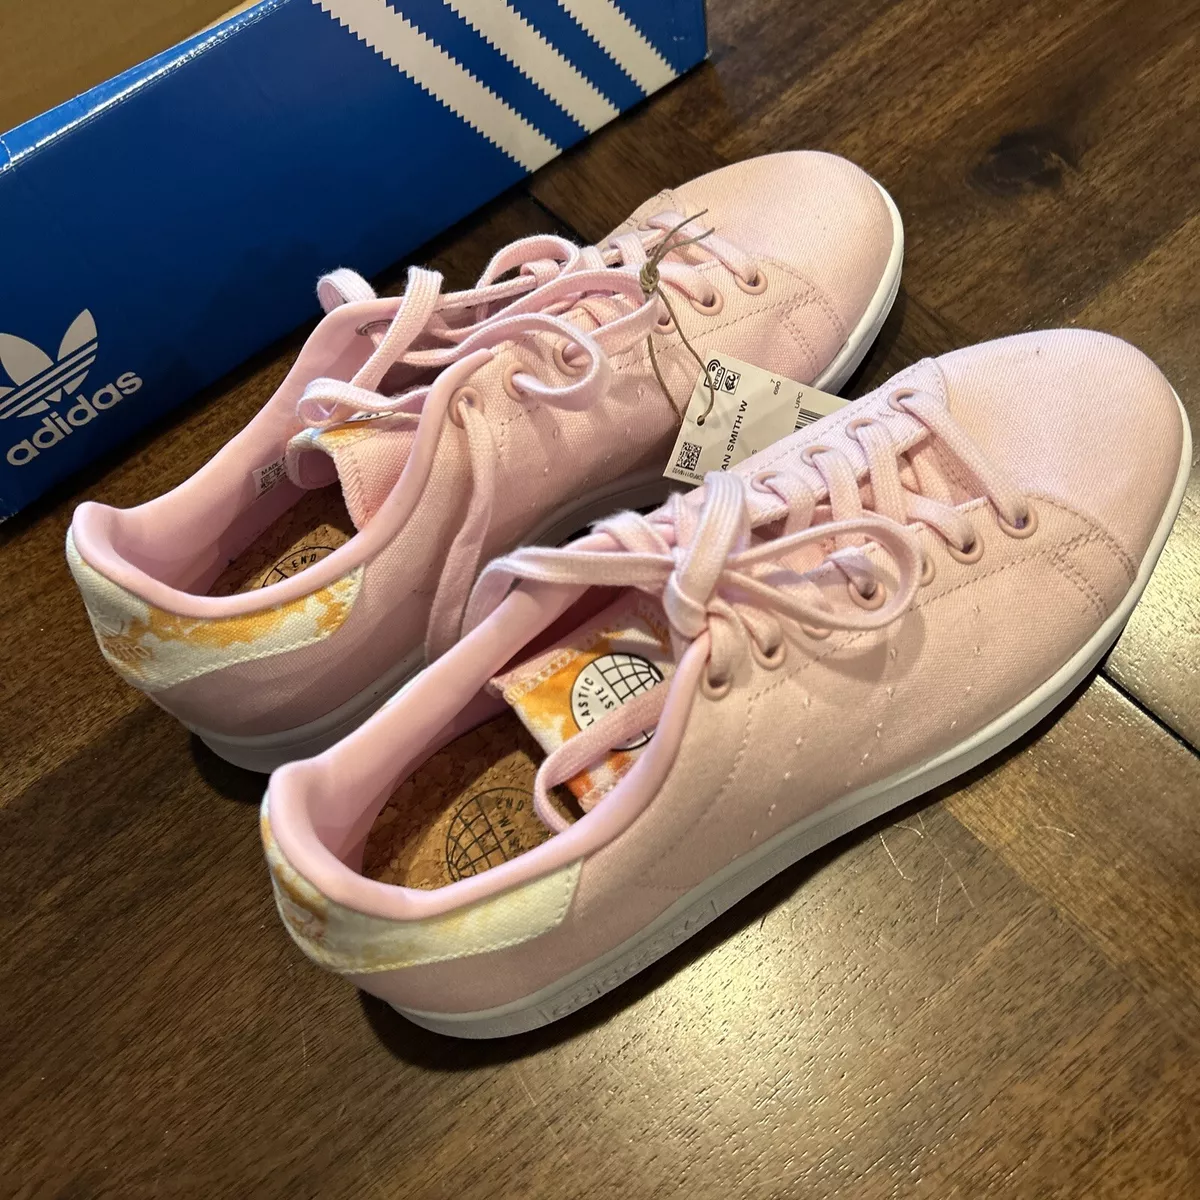 Real Adidas Stan Smith Originals Pink Canvas Shoes H03918 Women's Size 8.5  New